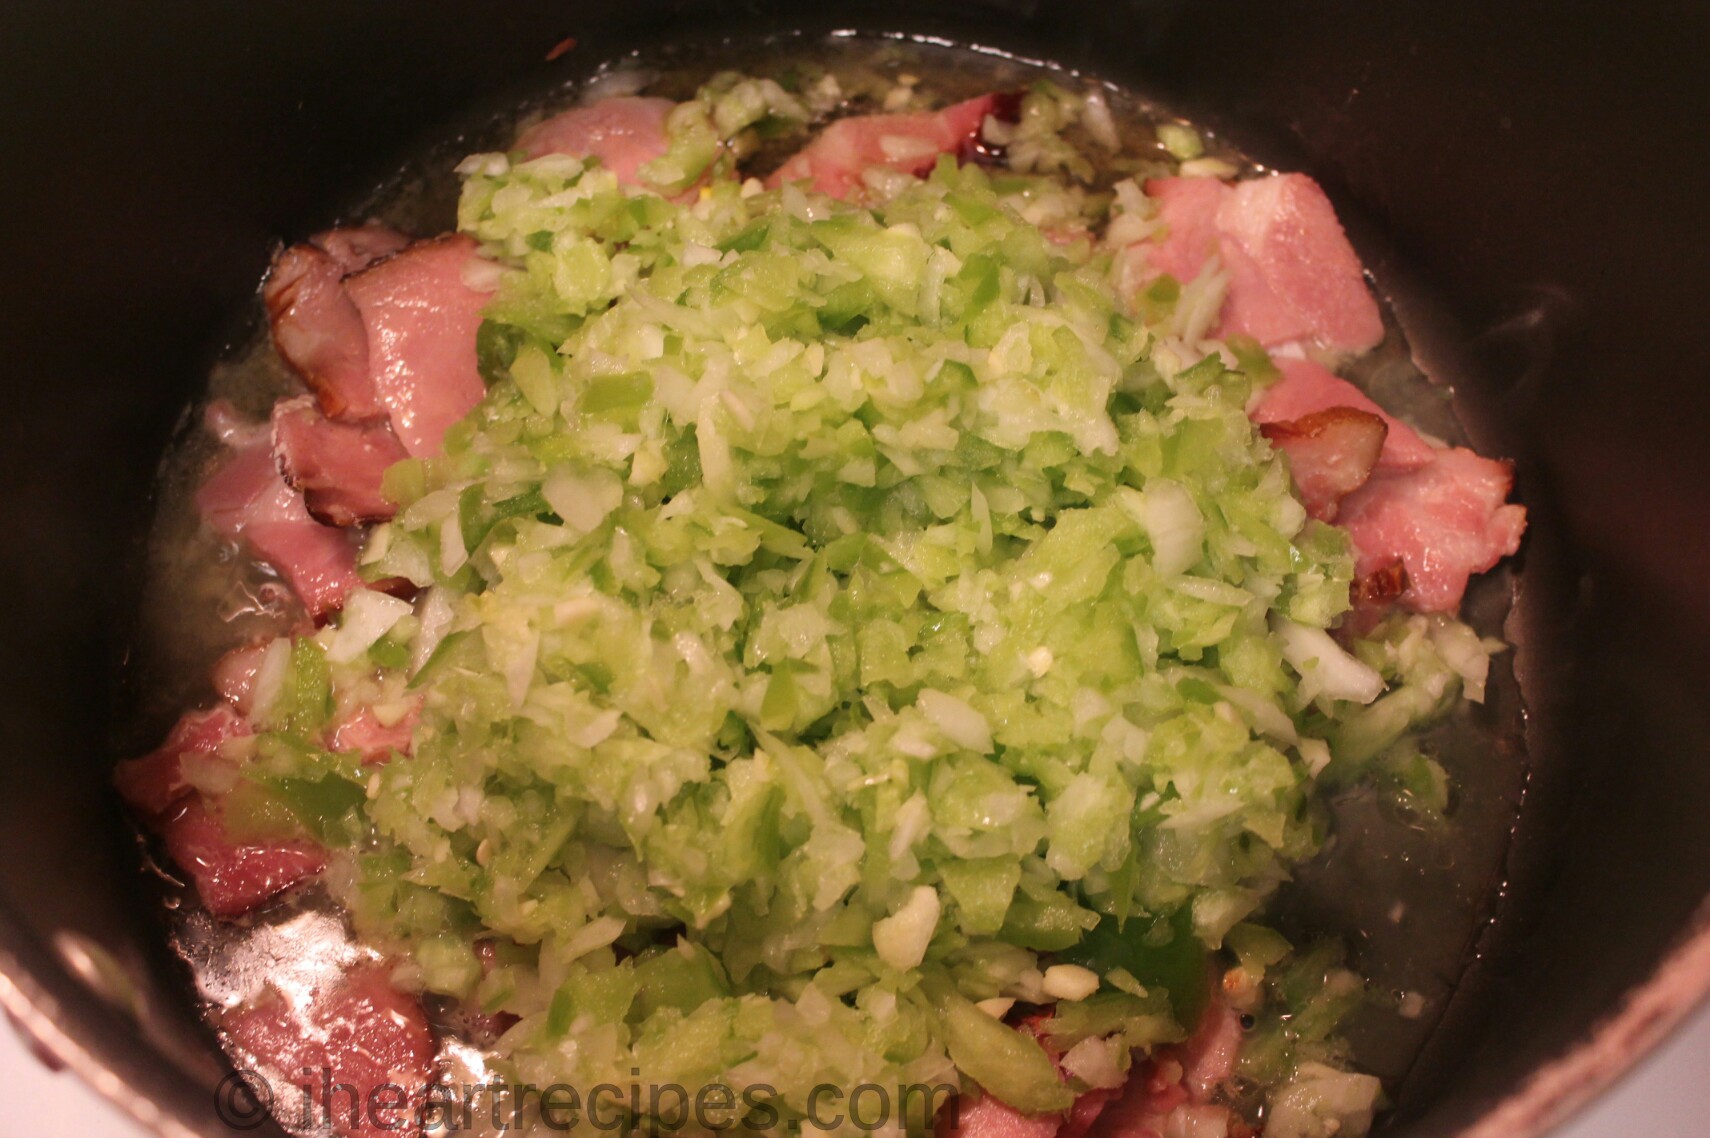 Chopped vegetables and bacon sauté on a large pot on the stovetop.